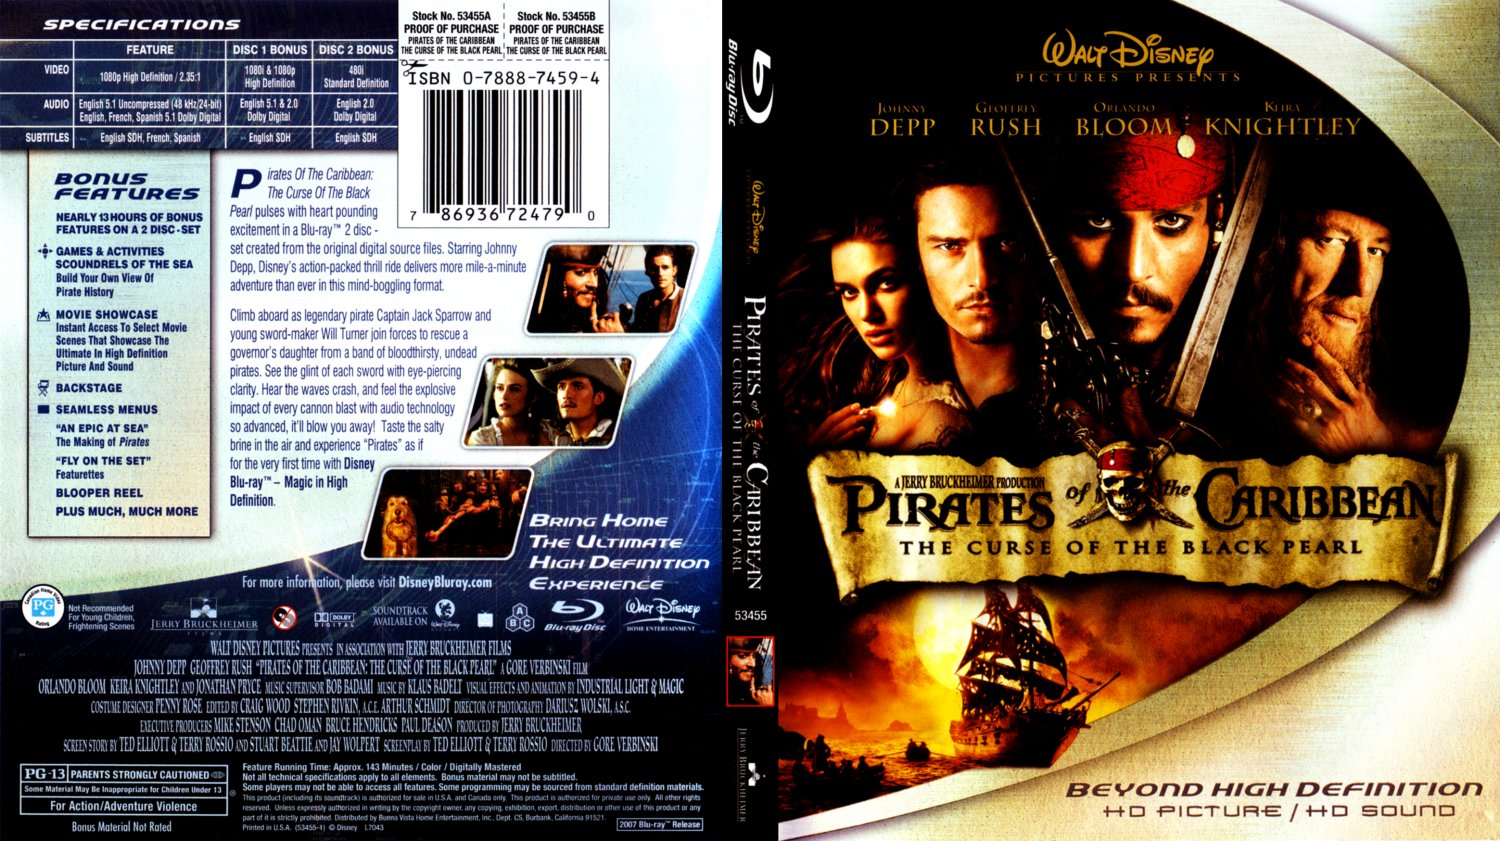 Pirates Of The Caribbean The Curse Of The Black Pearl Movie Blu Ray Scanned Covers Pirates 7092